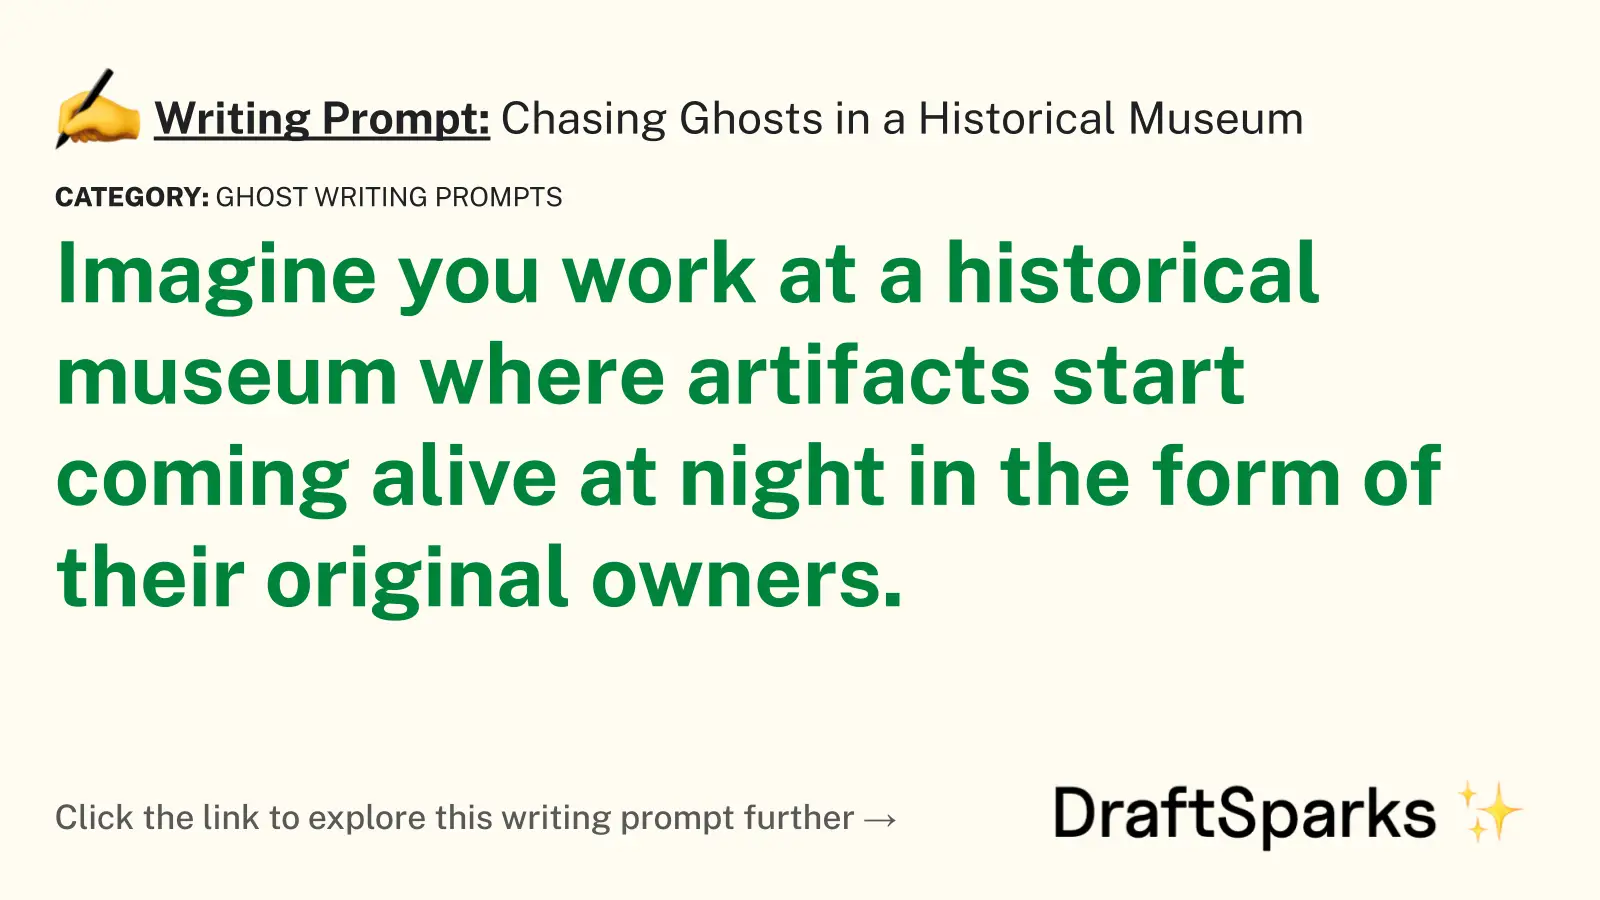 Chasing Ghosts in a Historical Museum